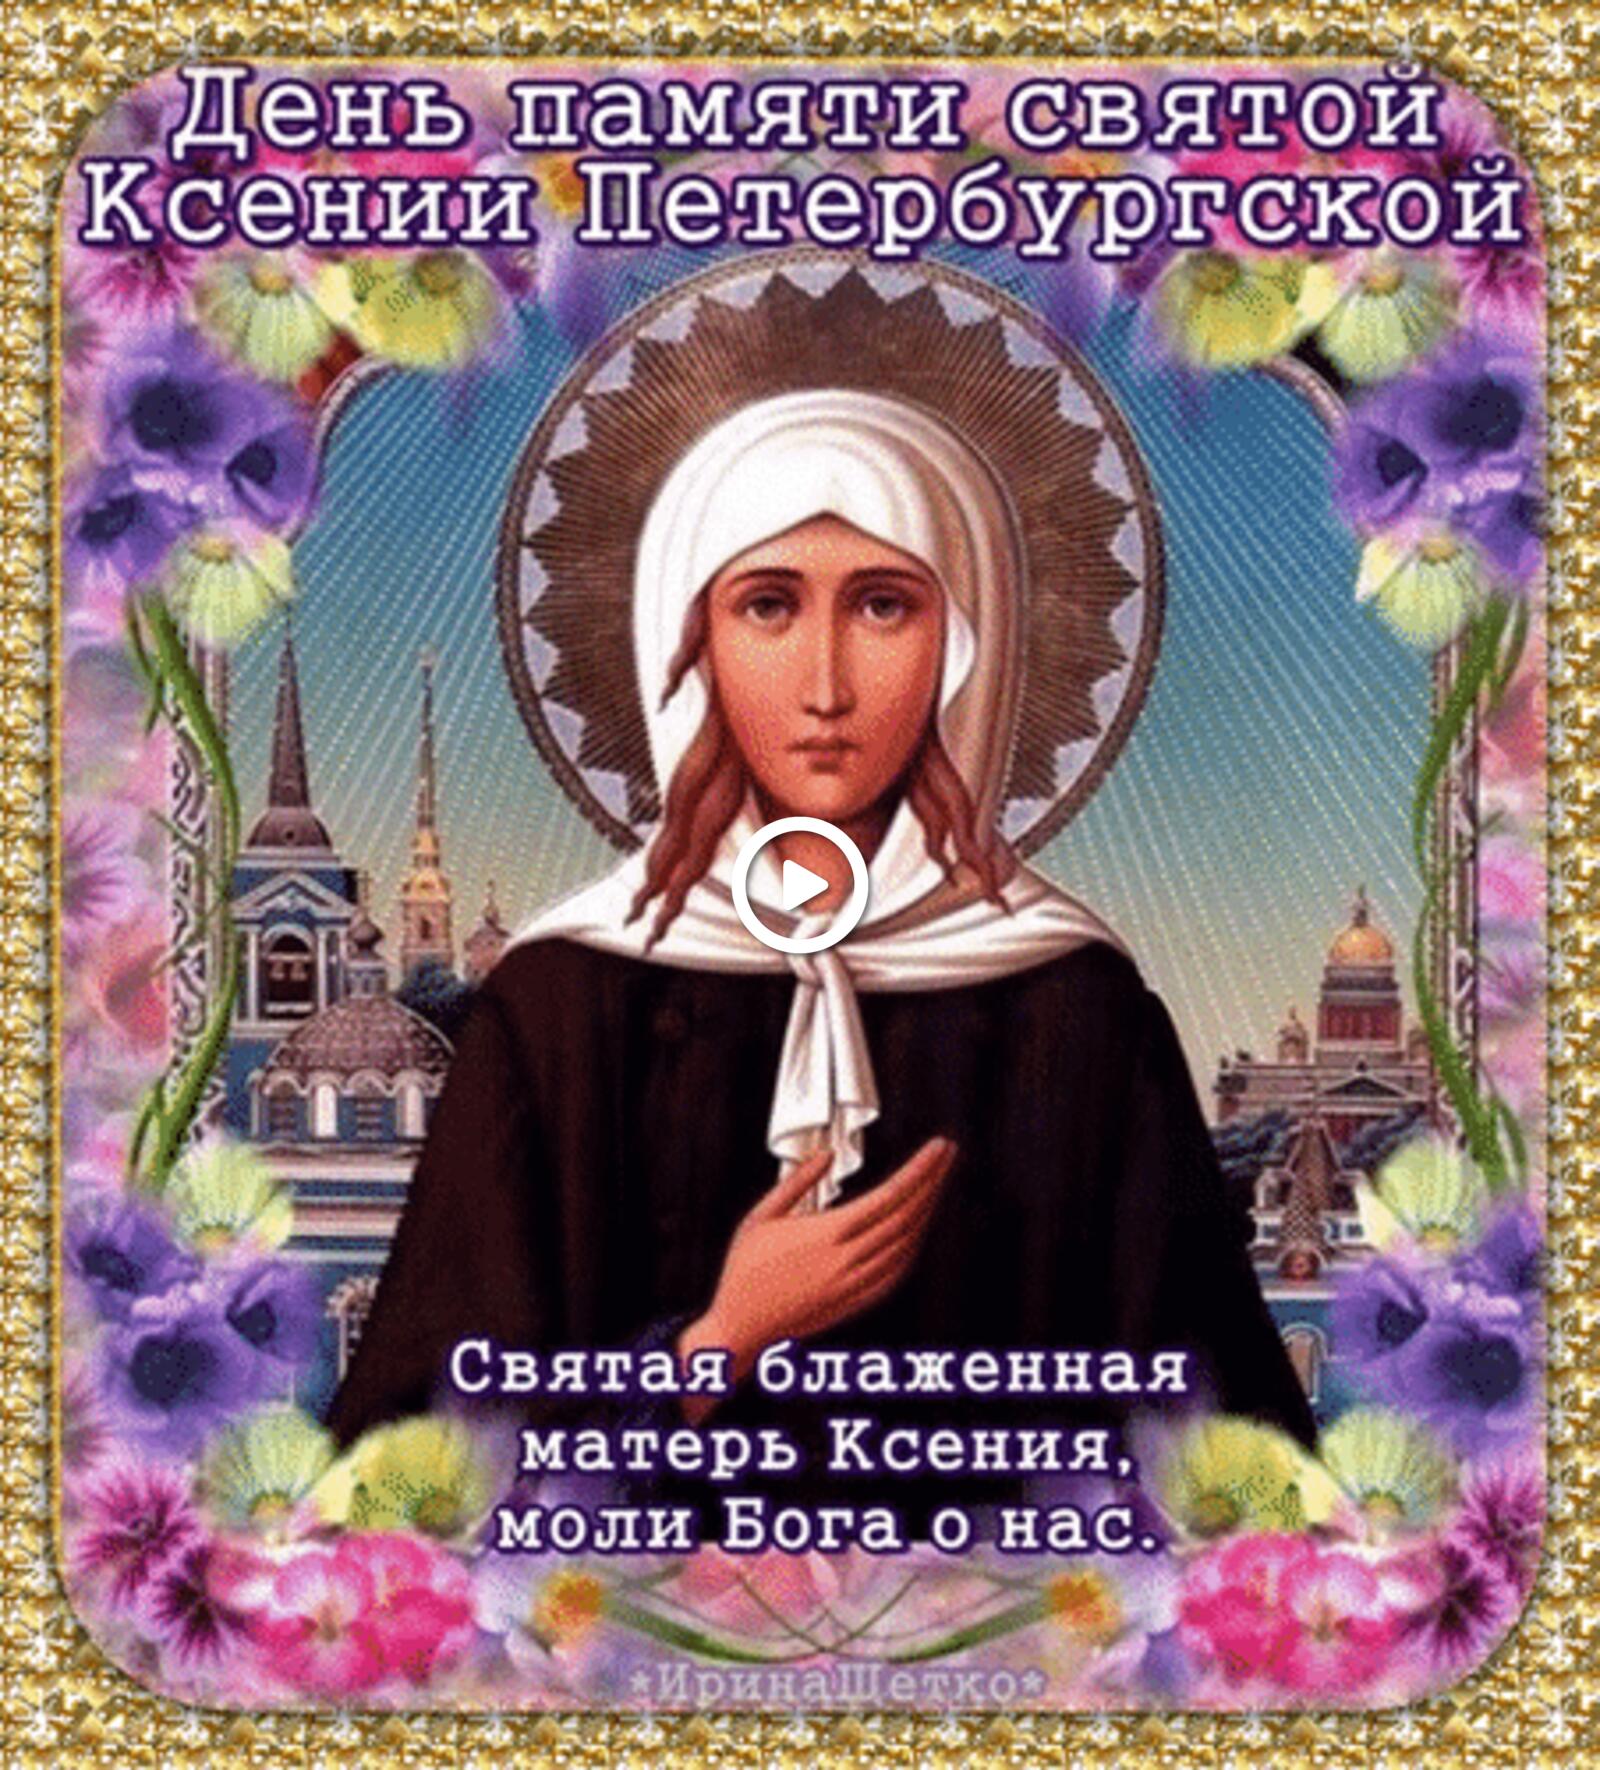 A postcard on the subject of Saint Xenia of St. Petersburg Memorial Day icon text for free